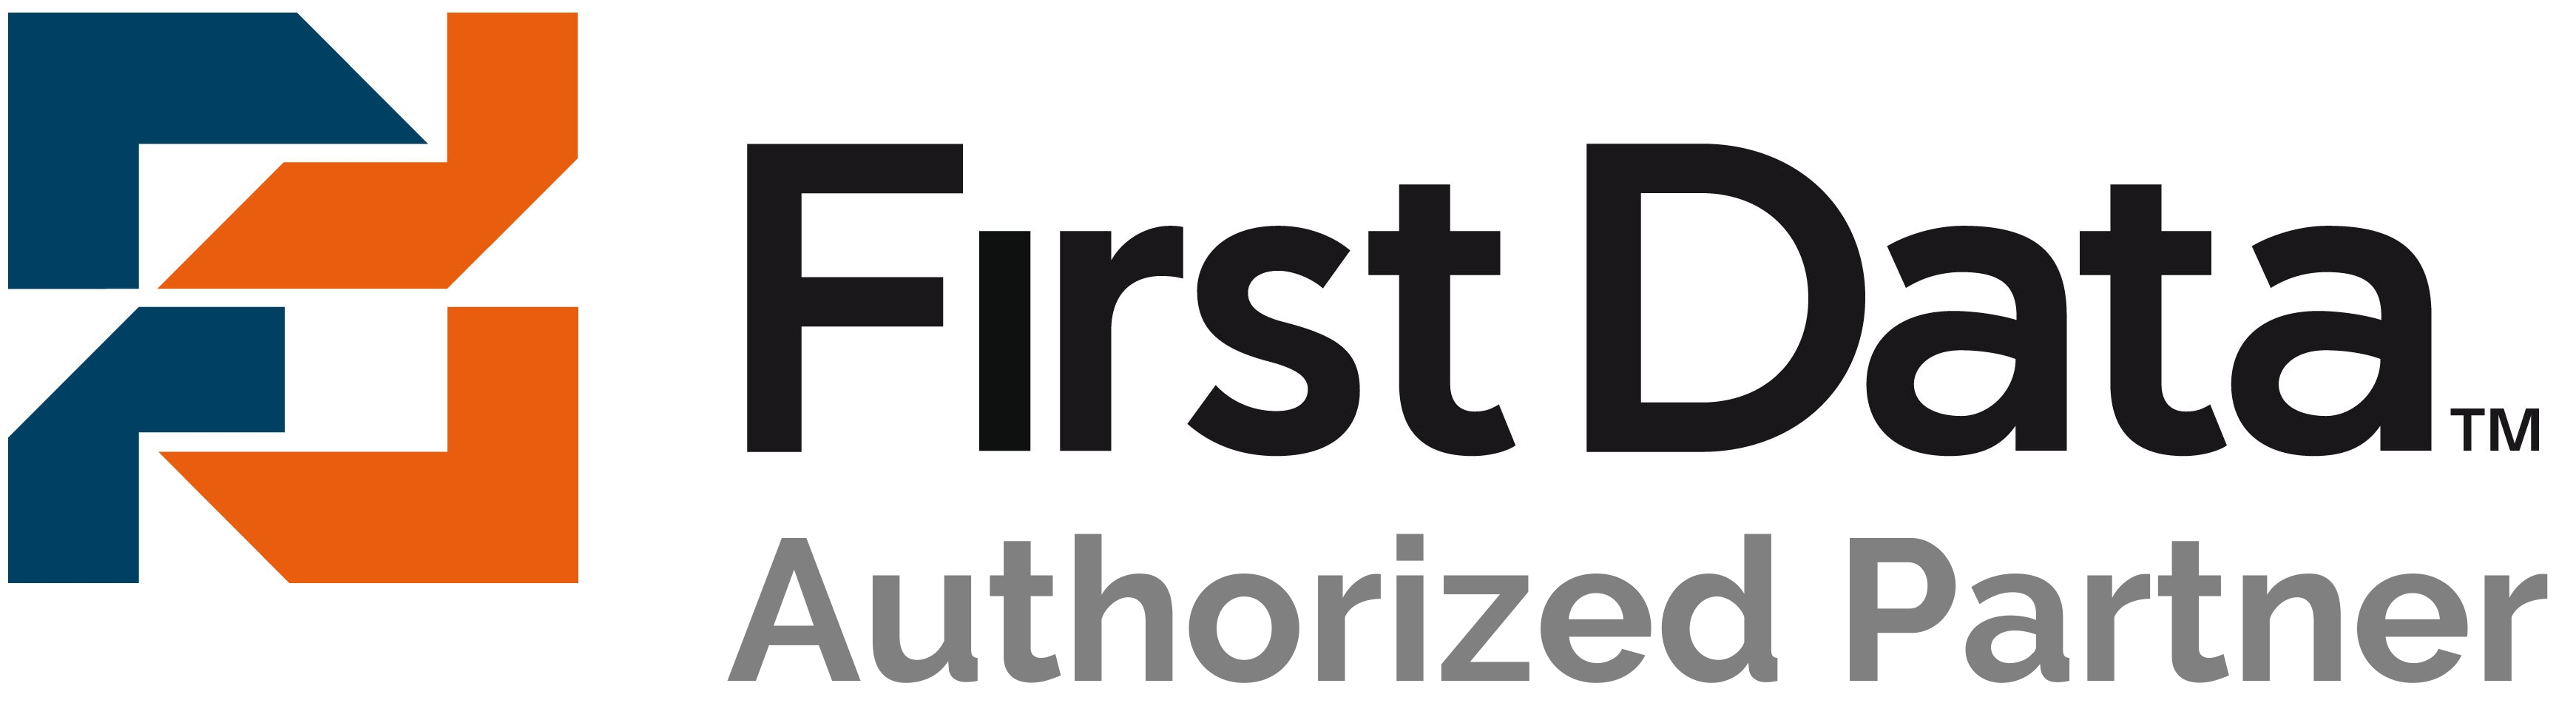 Zairmail site is an Authorized Partner with First Data